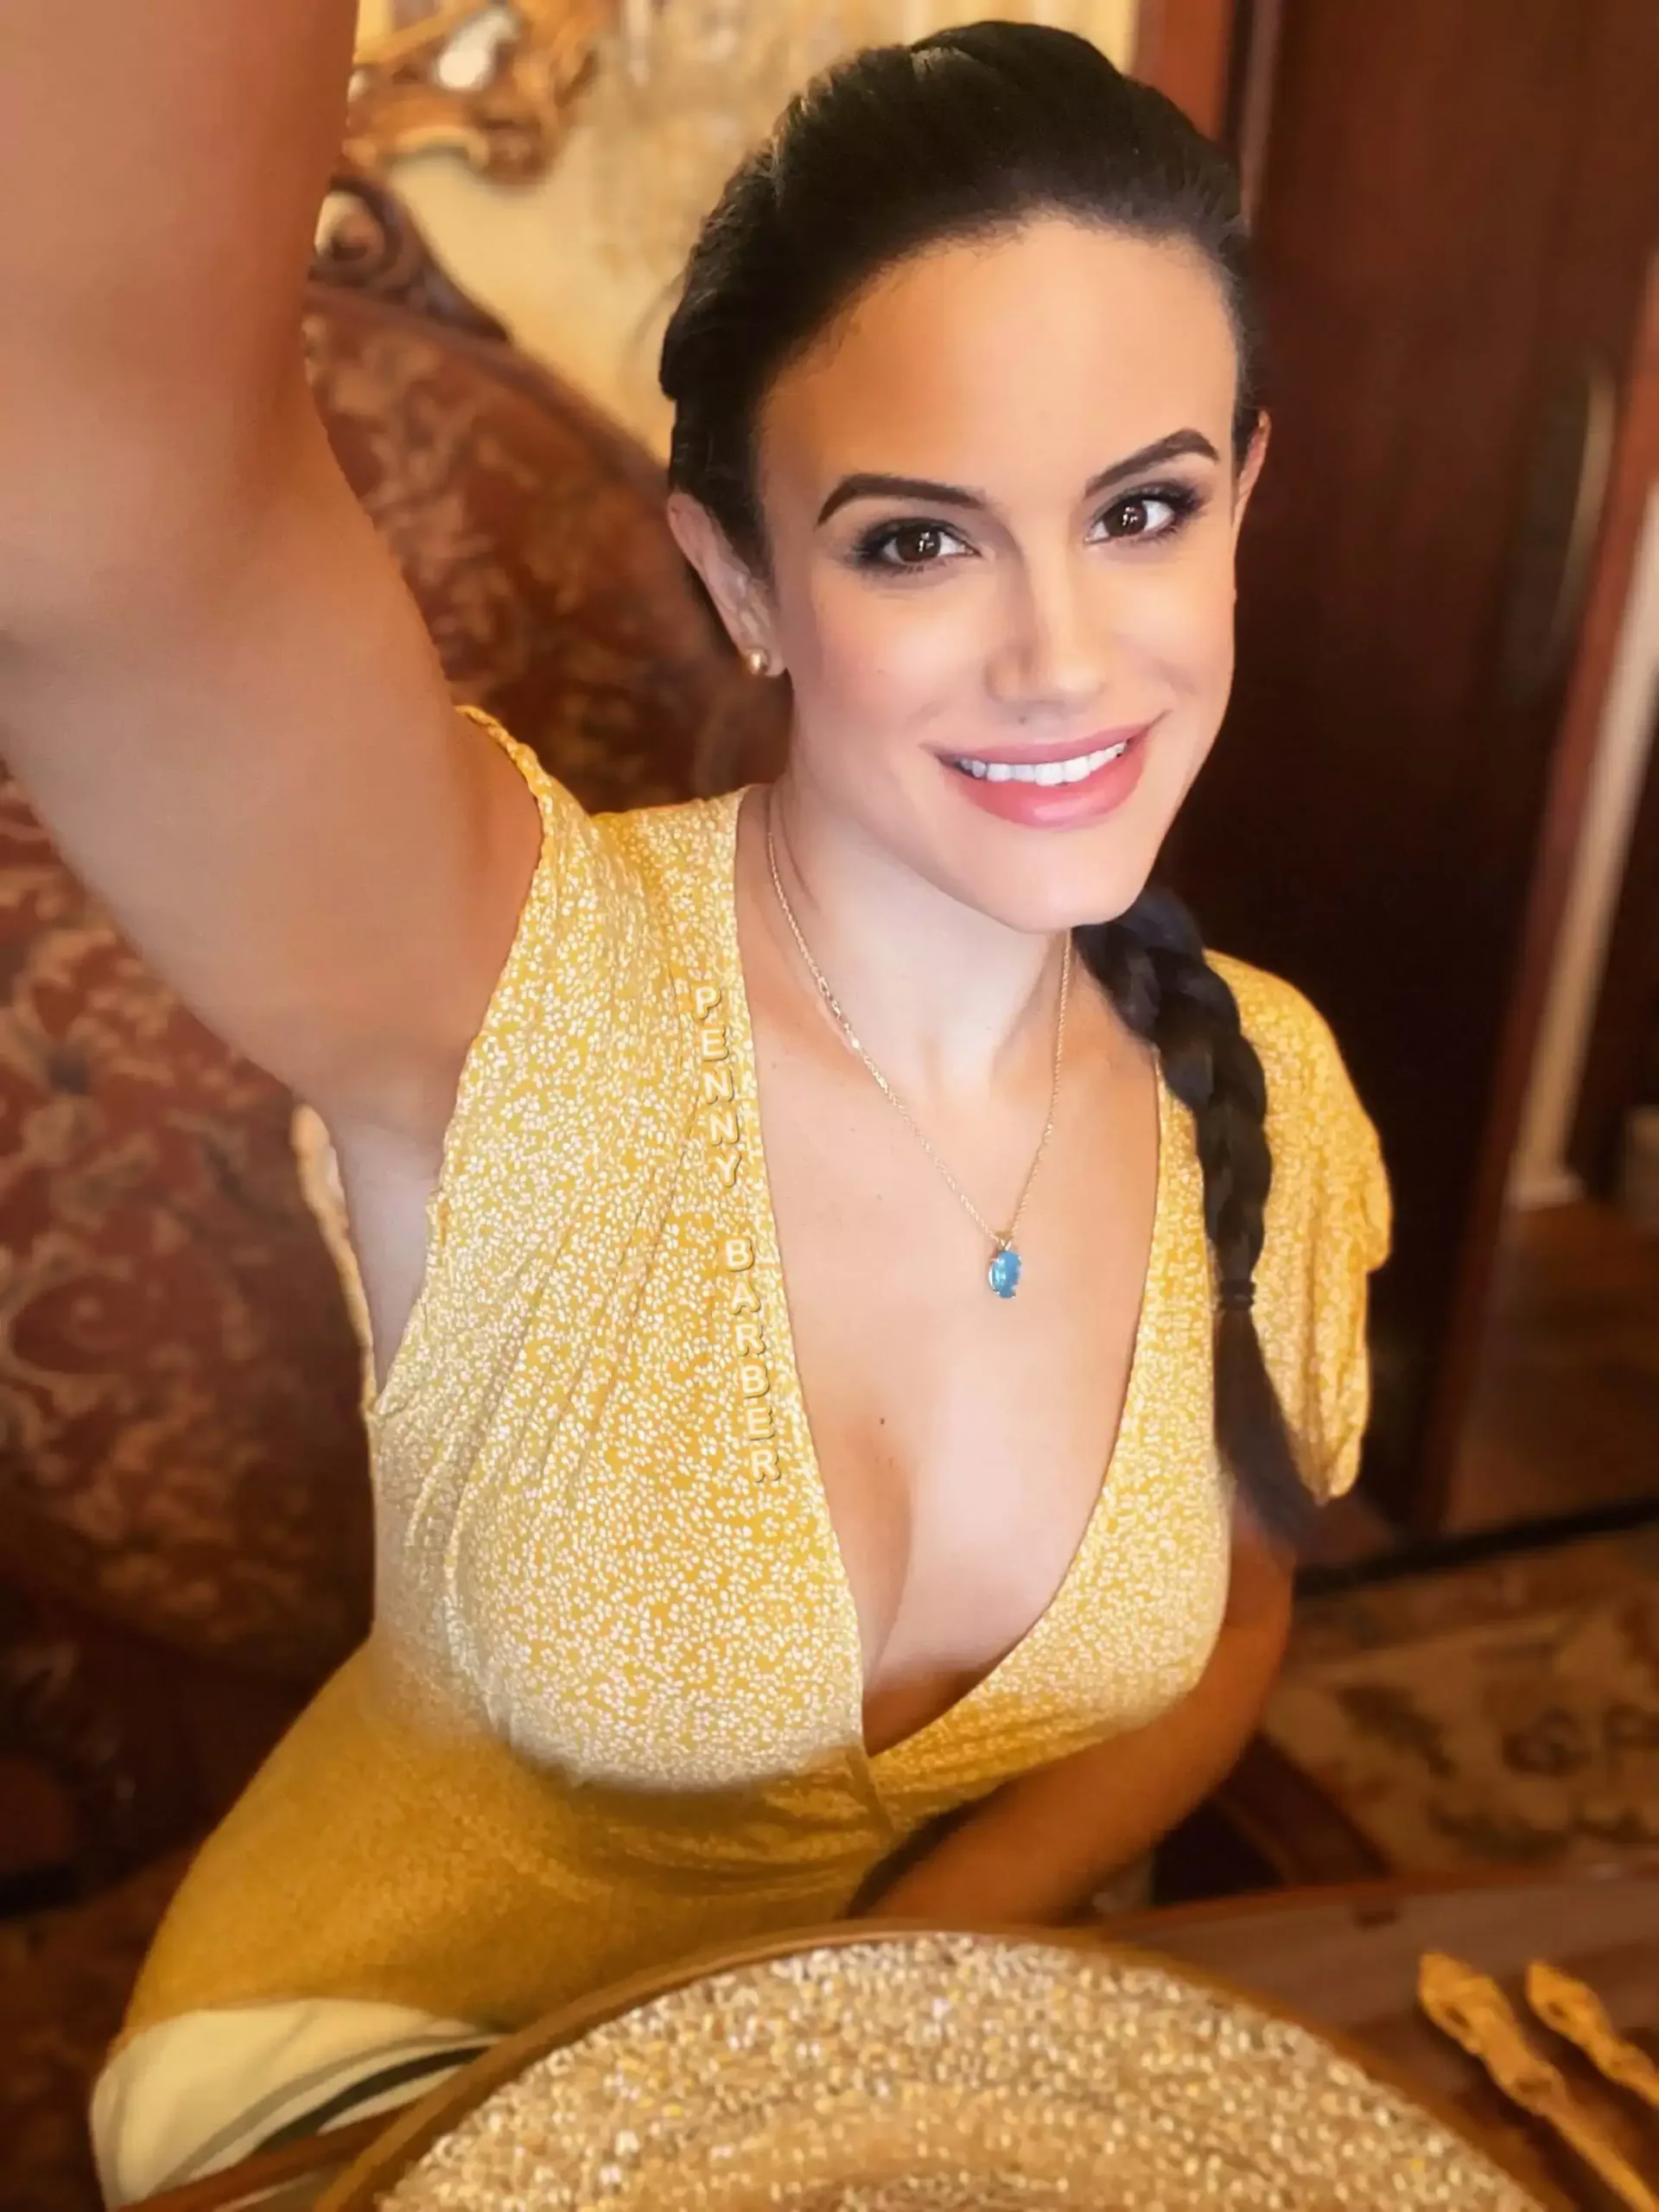 penny in yellow dress